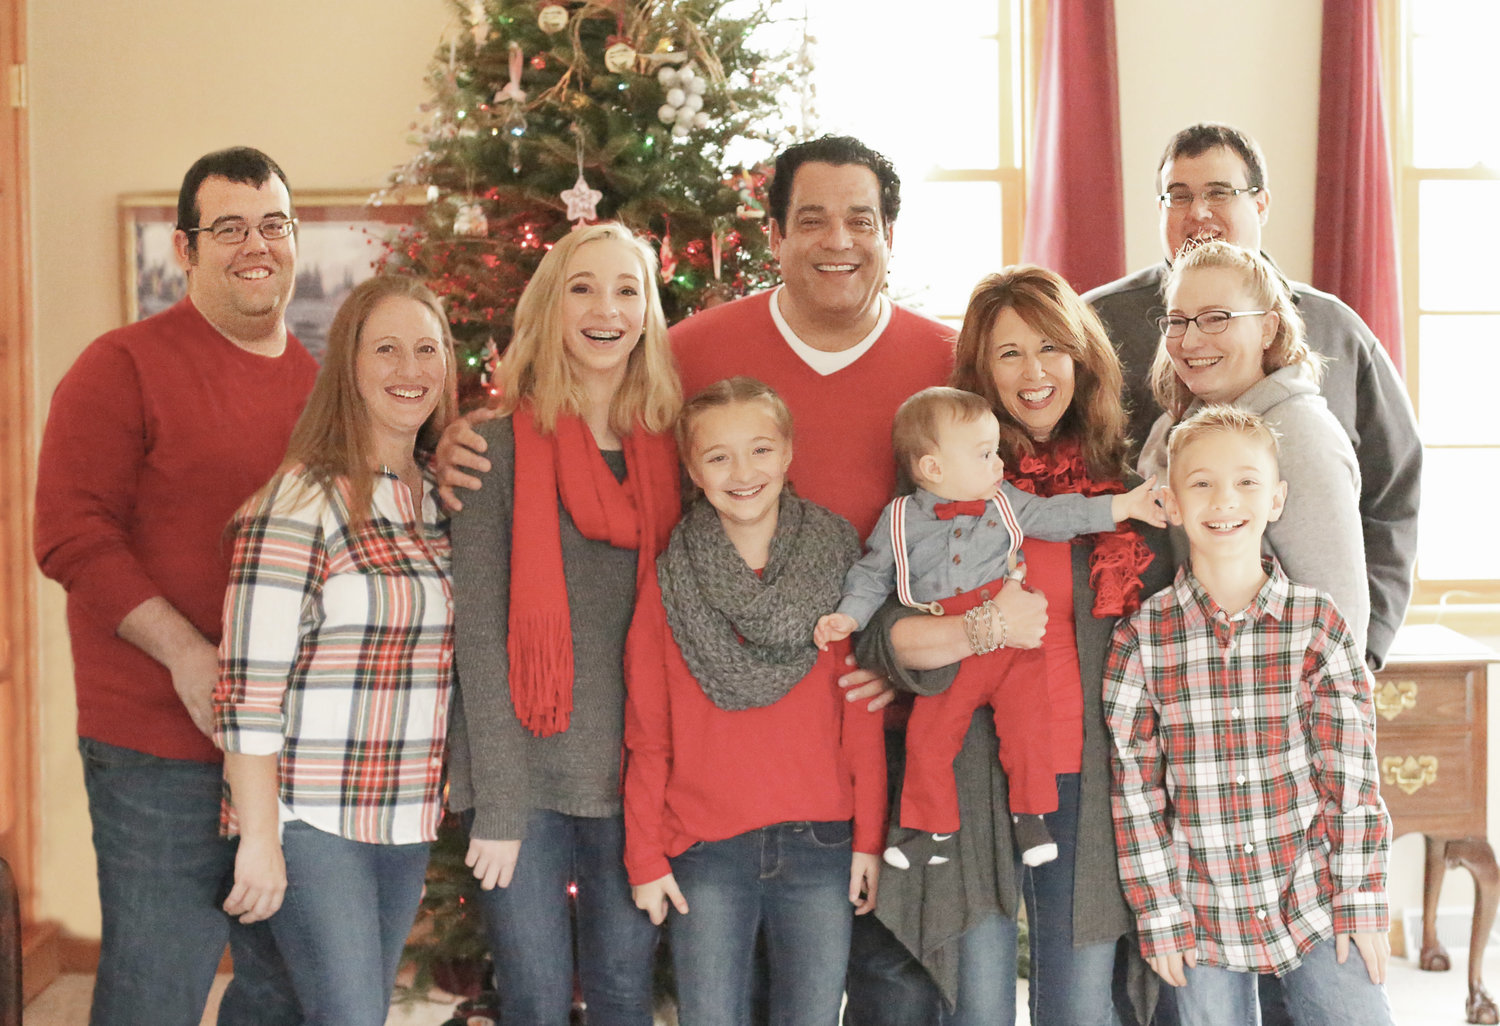 HAPPY FAMILY — Kevin Hall, center, pictured with his family during Christmas including his two sons, their wives, and his four grandchildren.